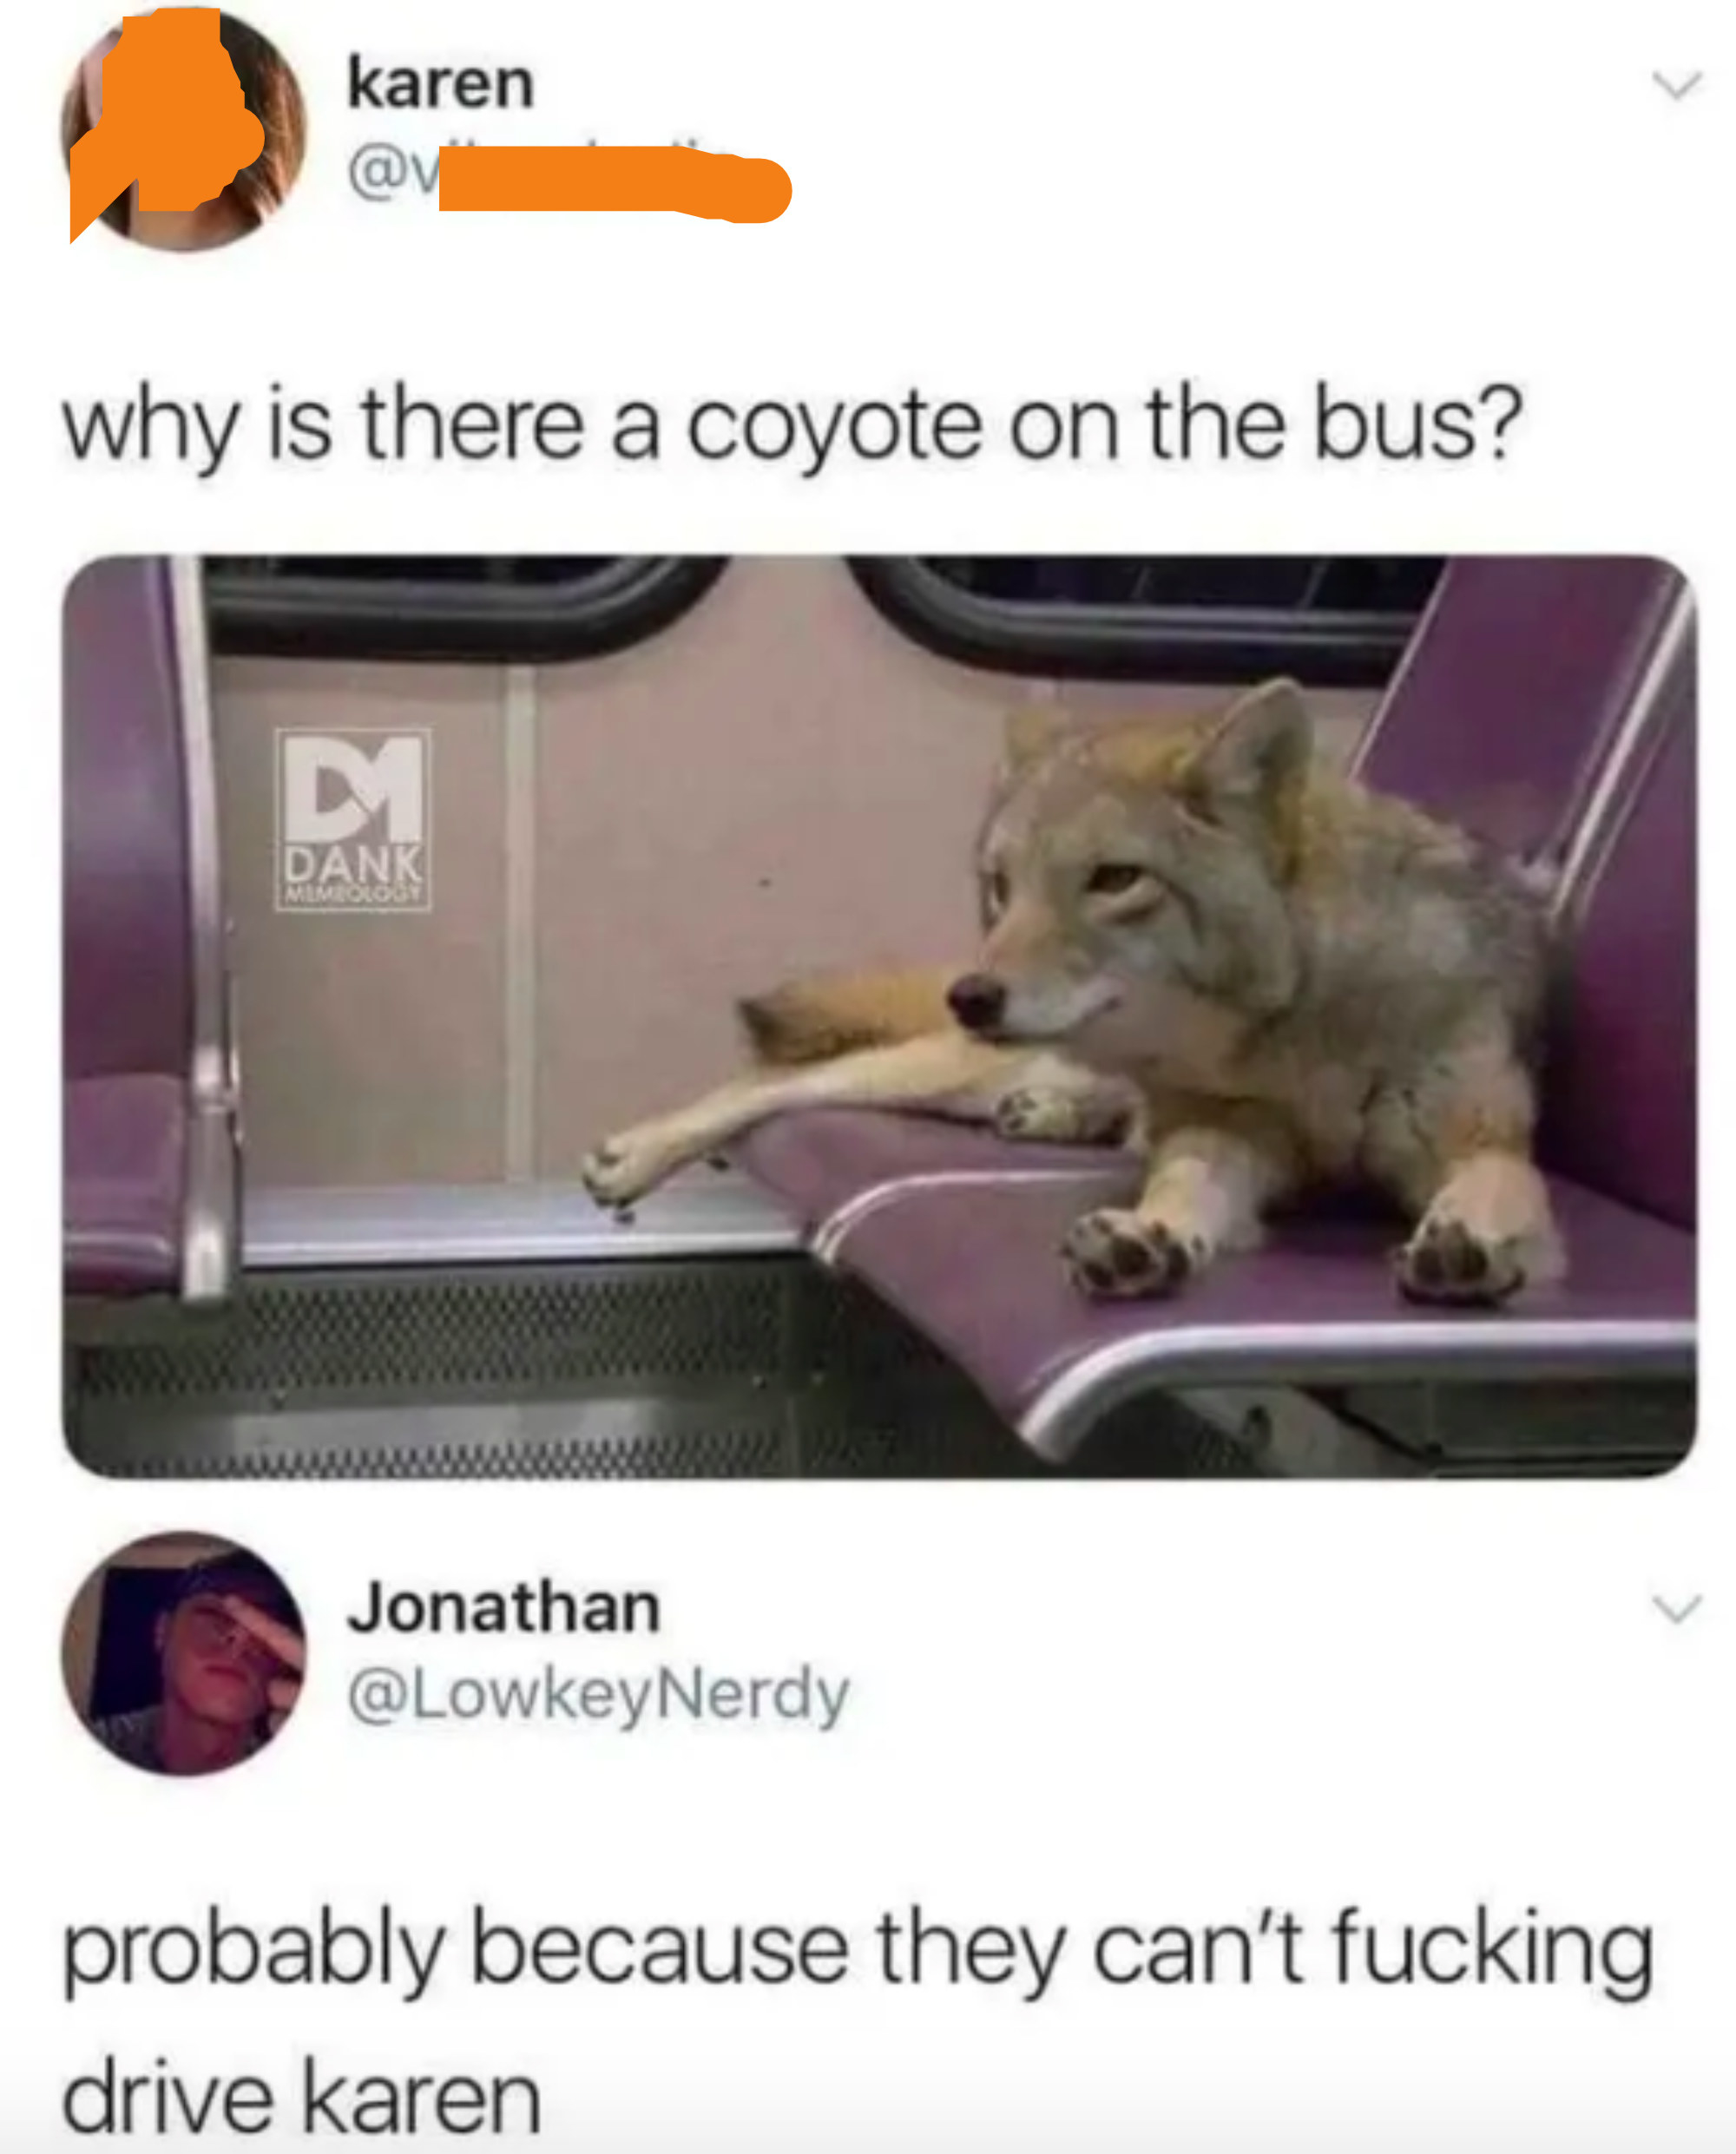 Wild-looking dog sitting on a bus seat, someone wonders why a coyote is on the bus, and someone responds probably because they can&#x27;t drive